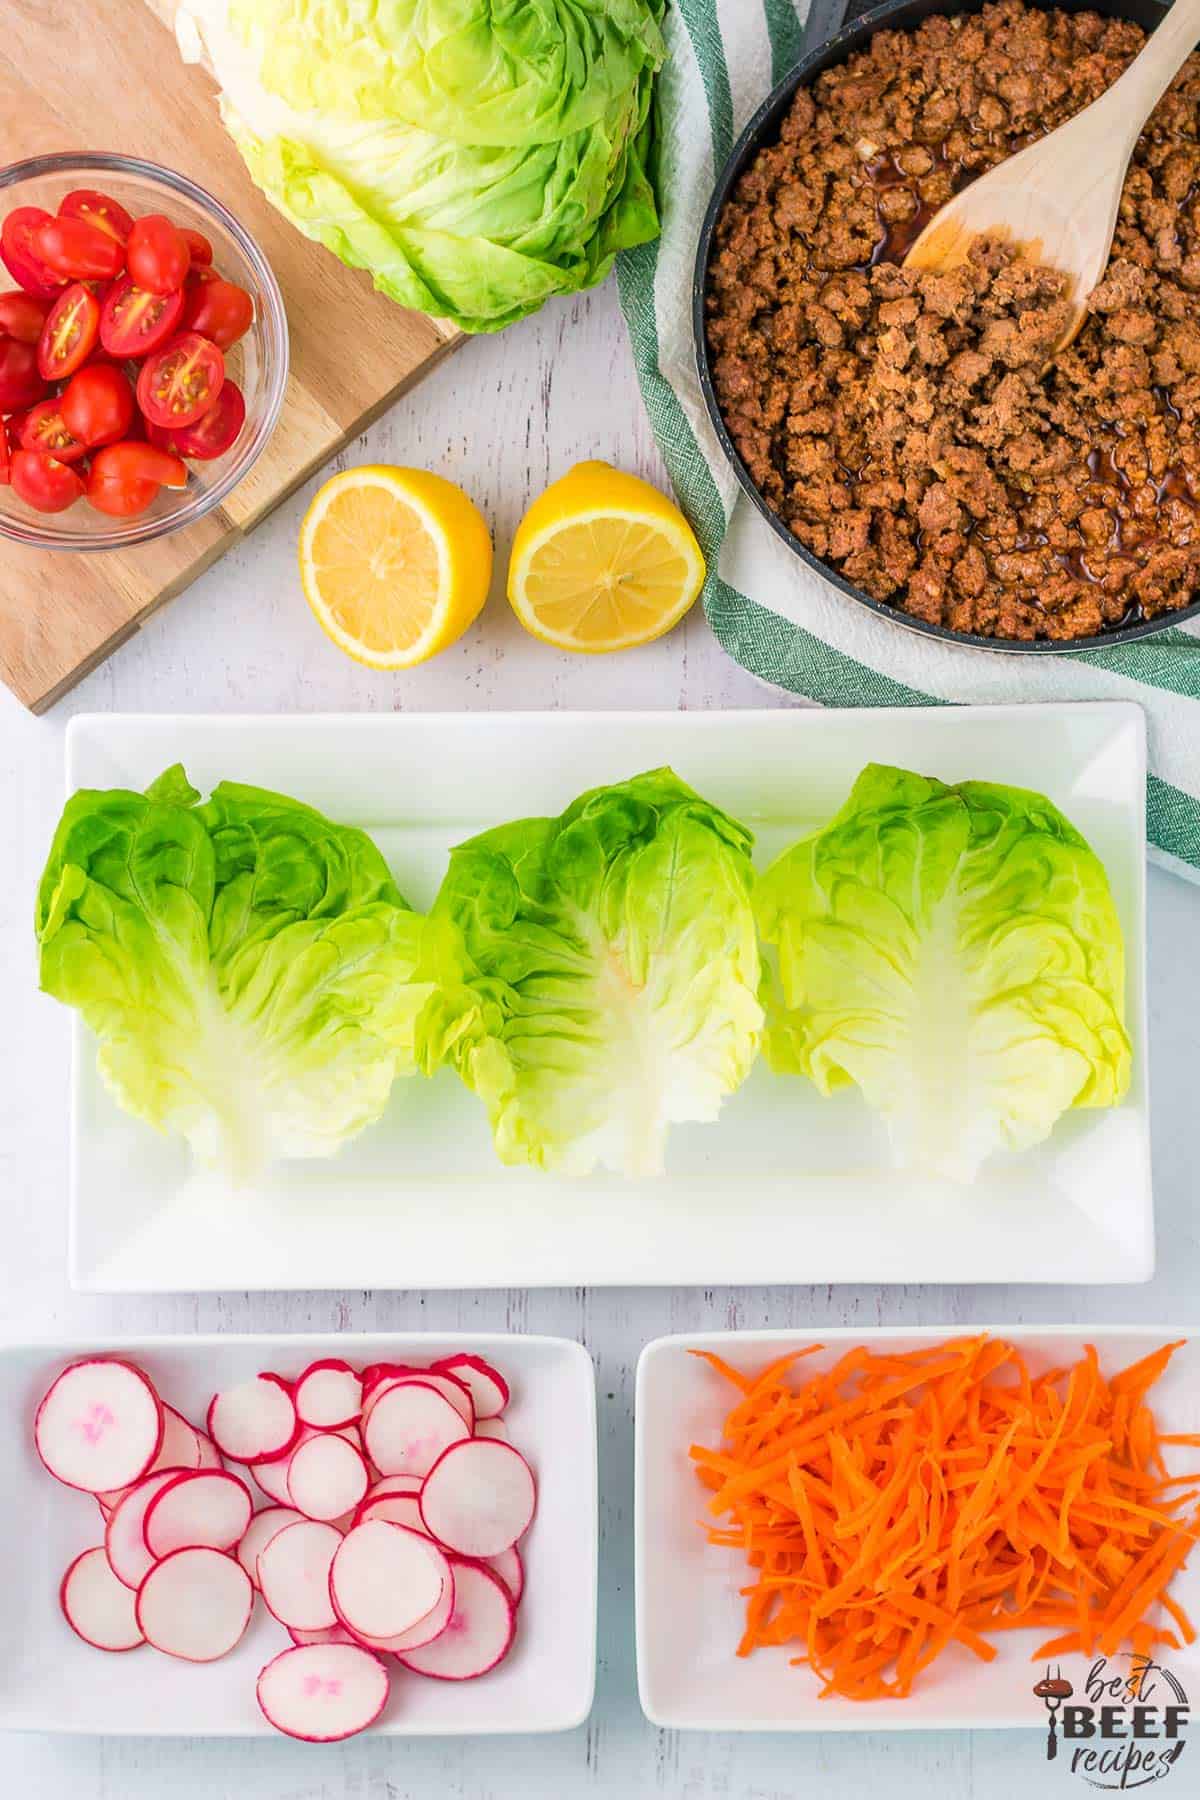 Ingredients ready to assemble Portuguese beef lettuce wraps